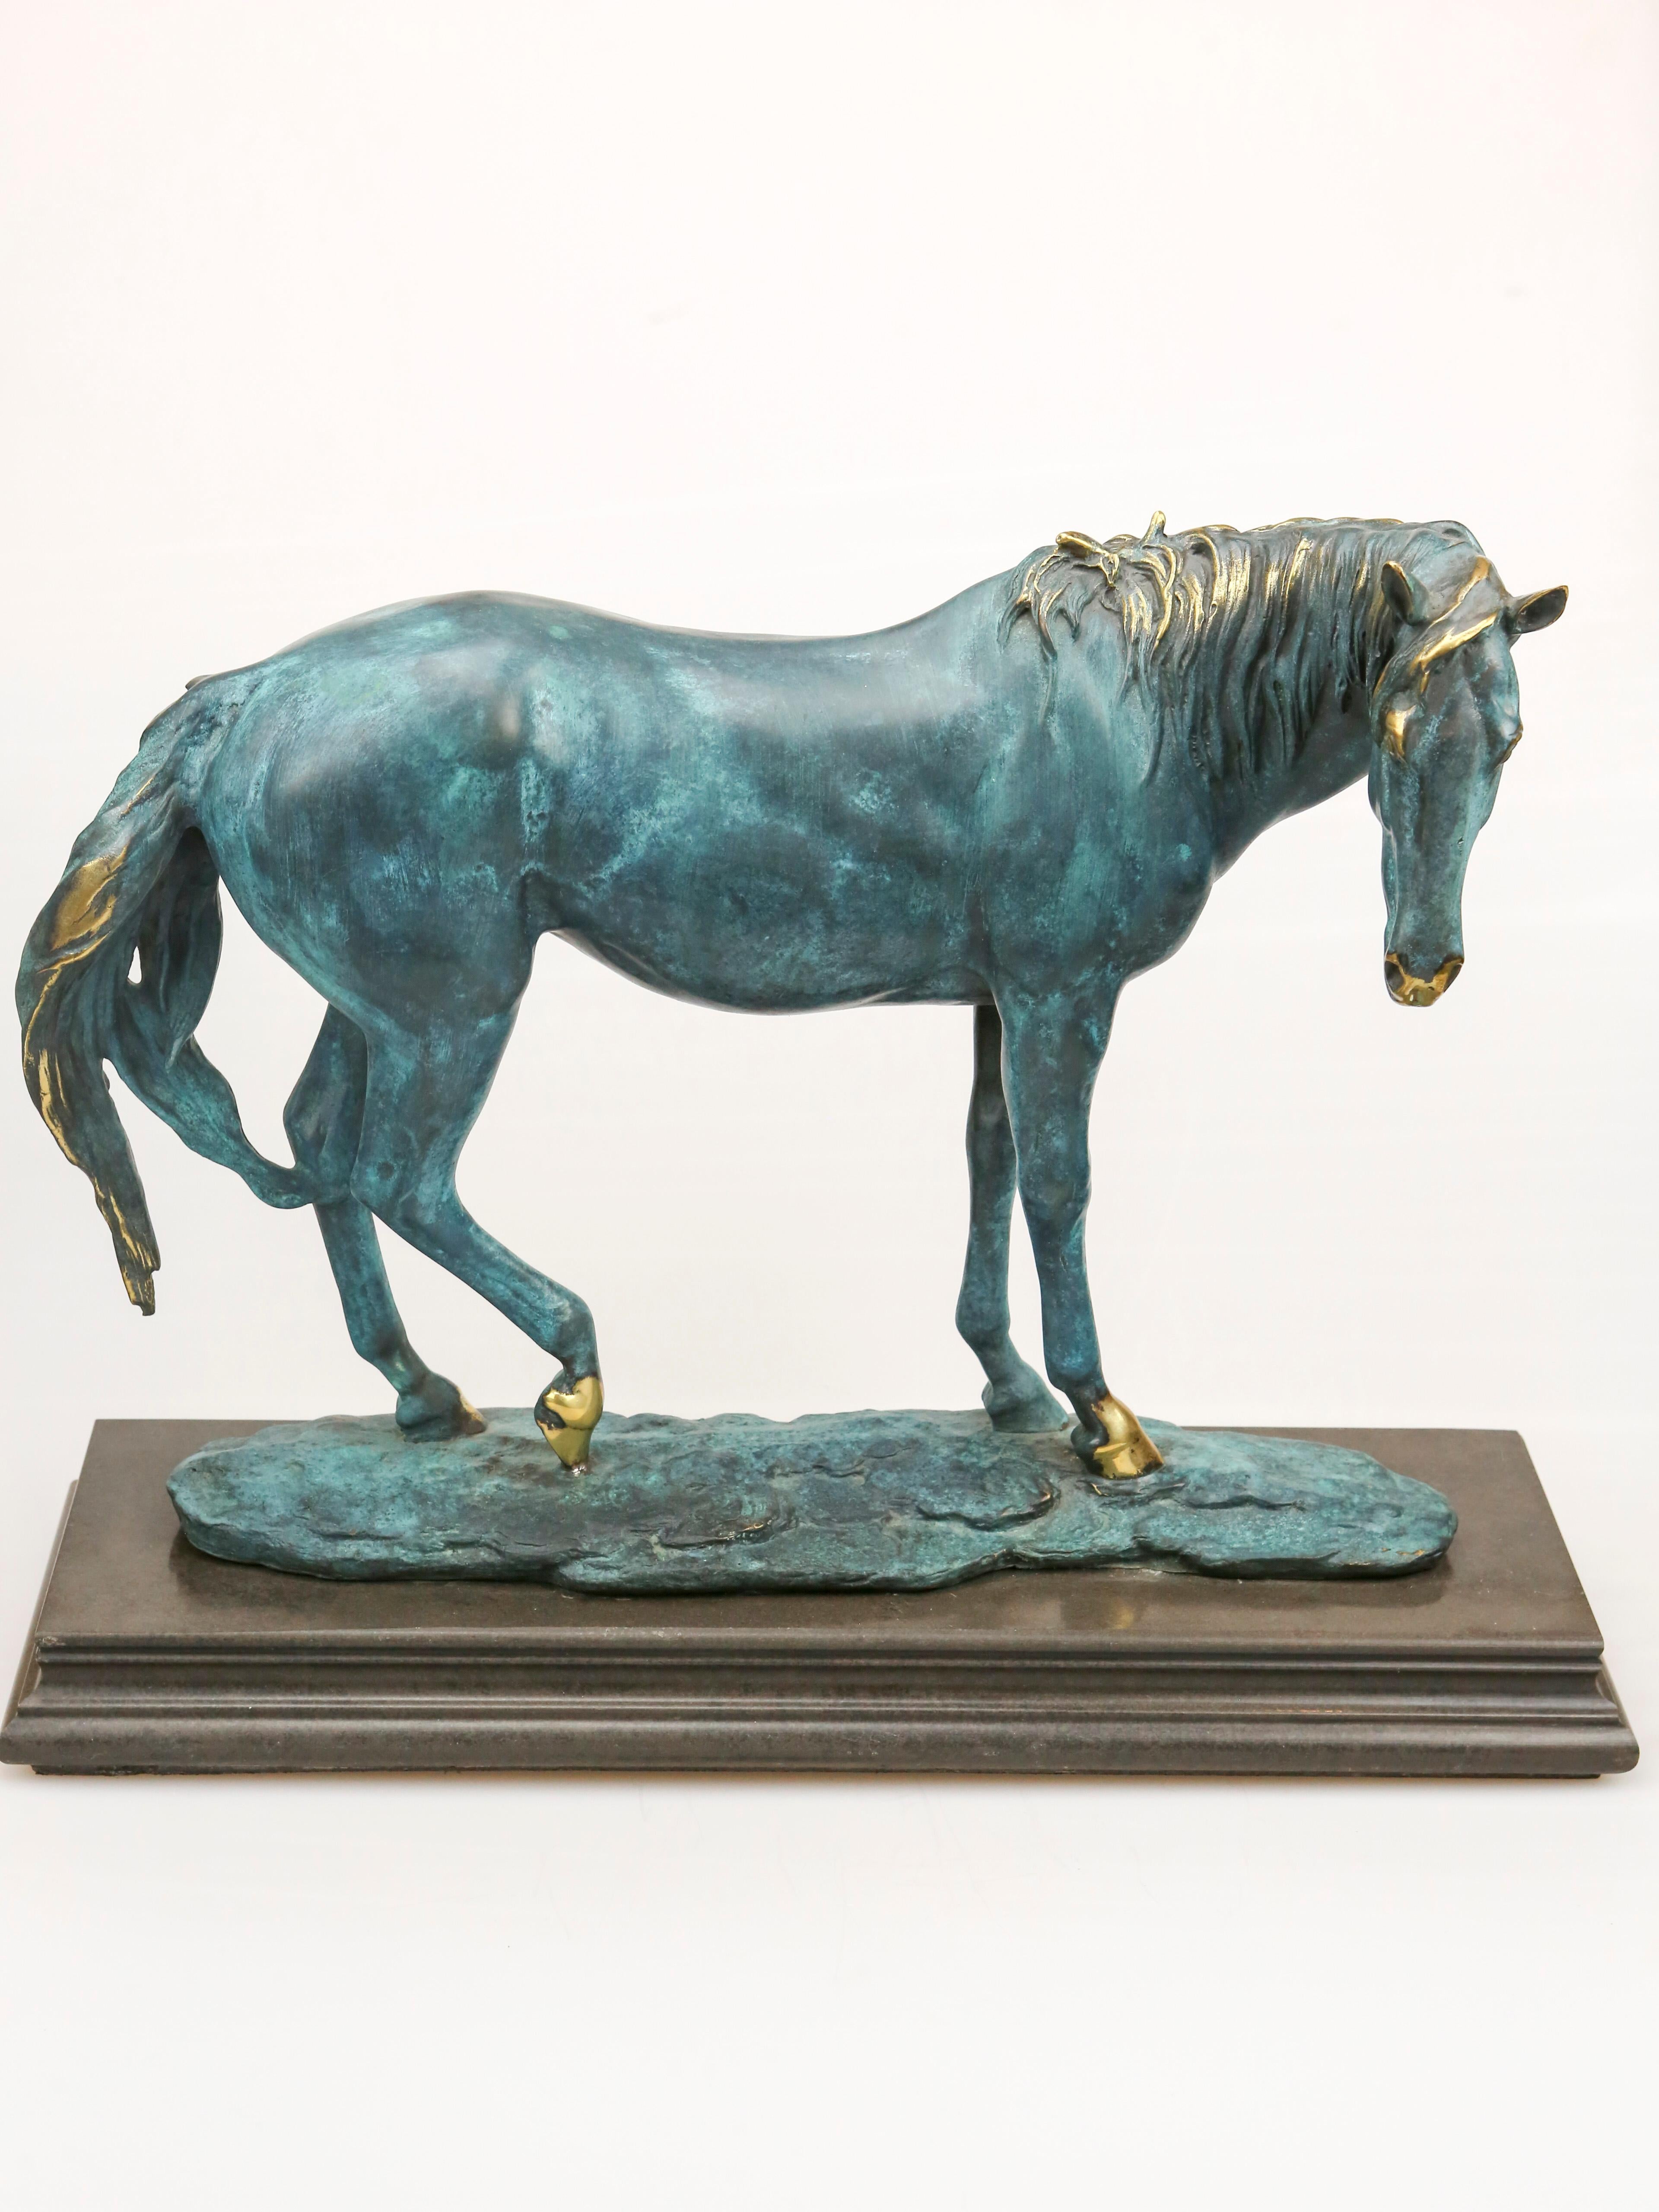 European Horse Trophy Collectible Bronze Sculpture

Serving man in war, mobility, productivity, agriculture, and development of all kinds, horses are by far one of the largest contributors in the enhancement of our civilization. With such